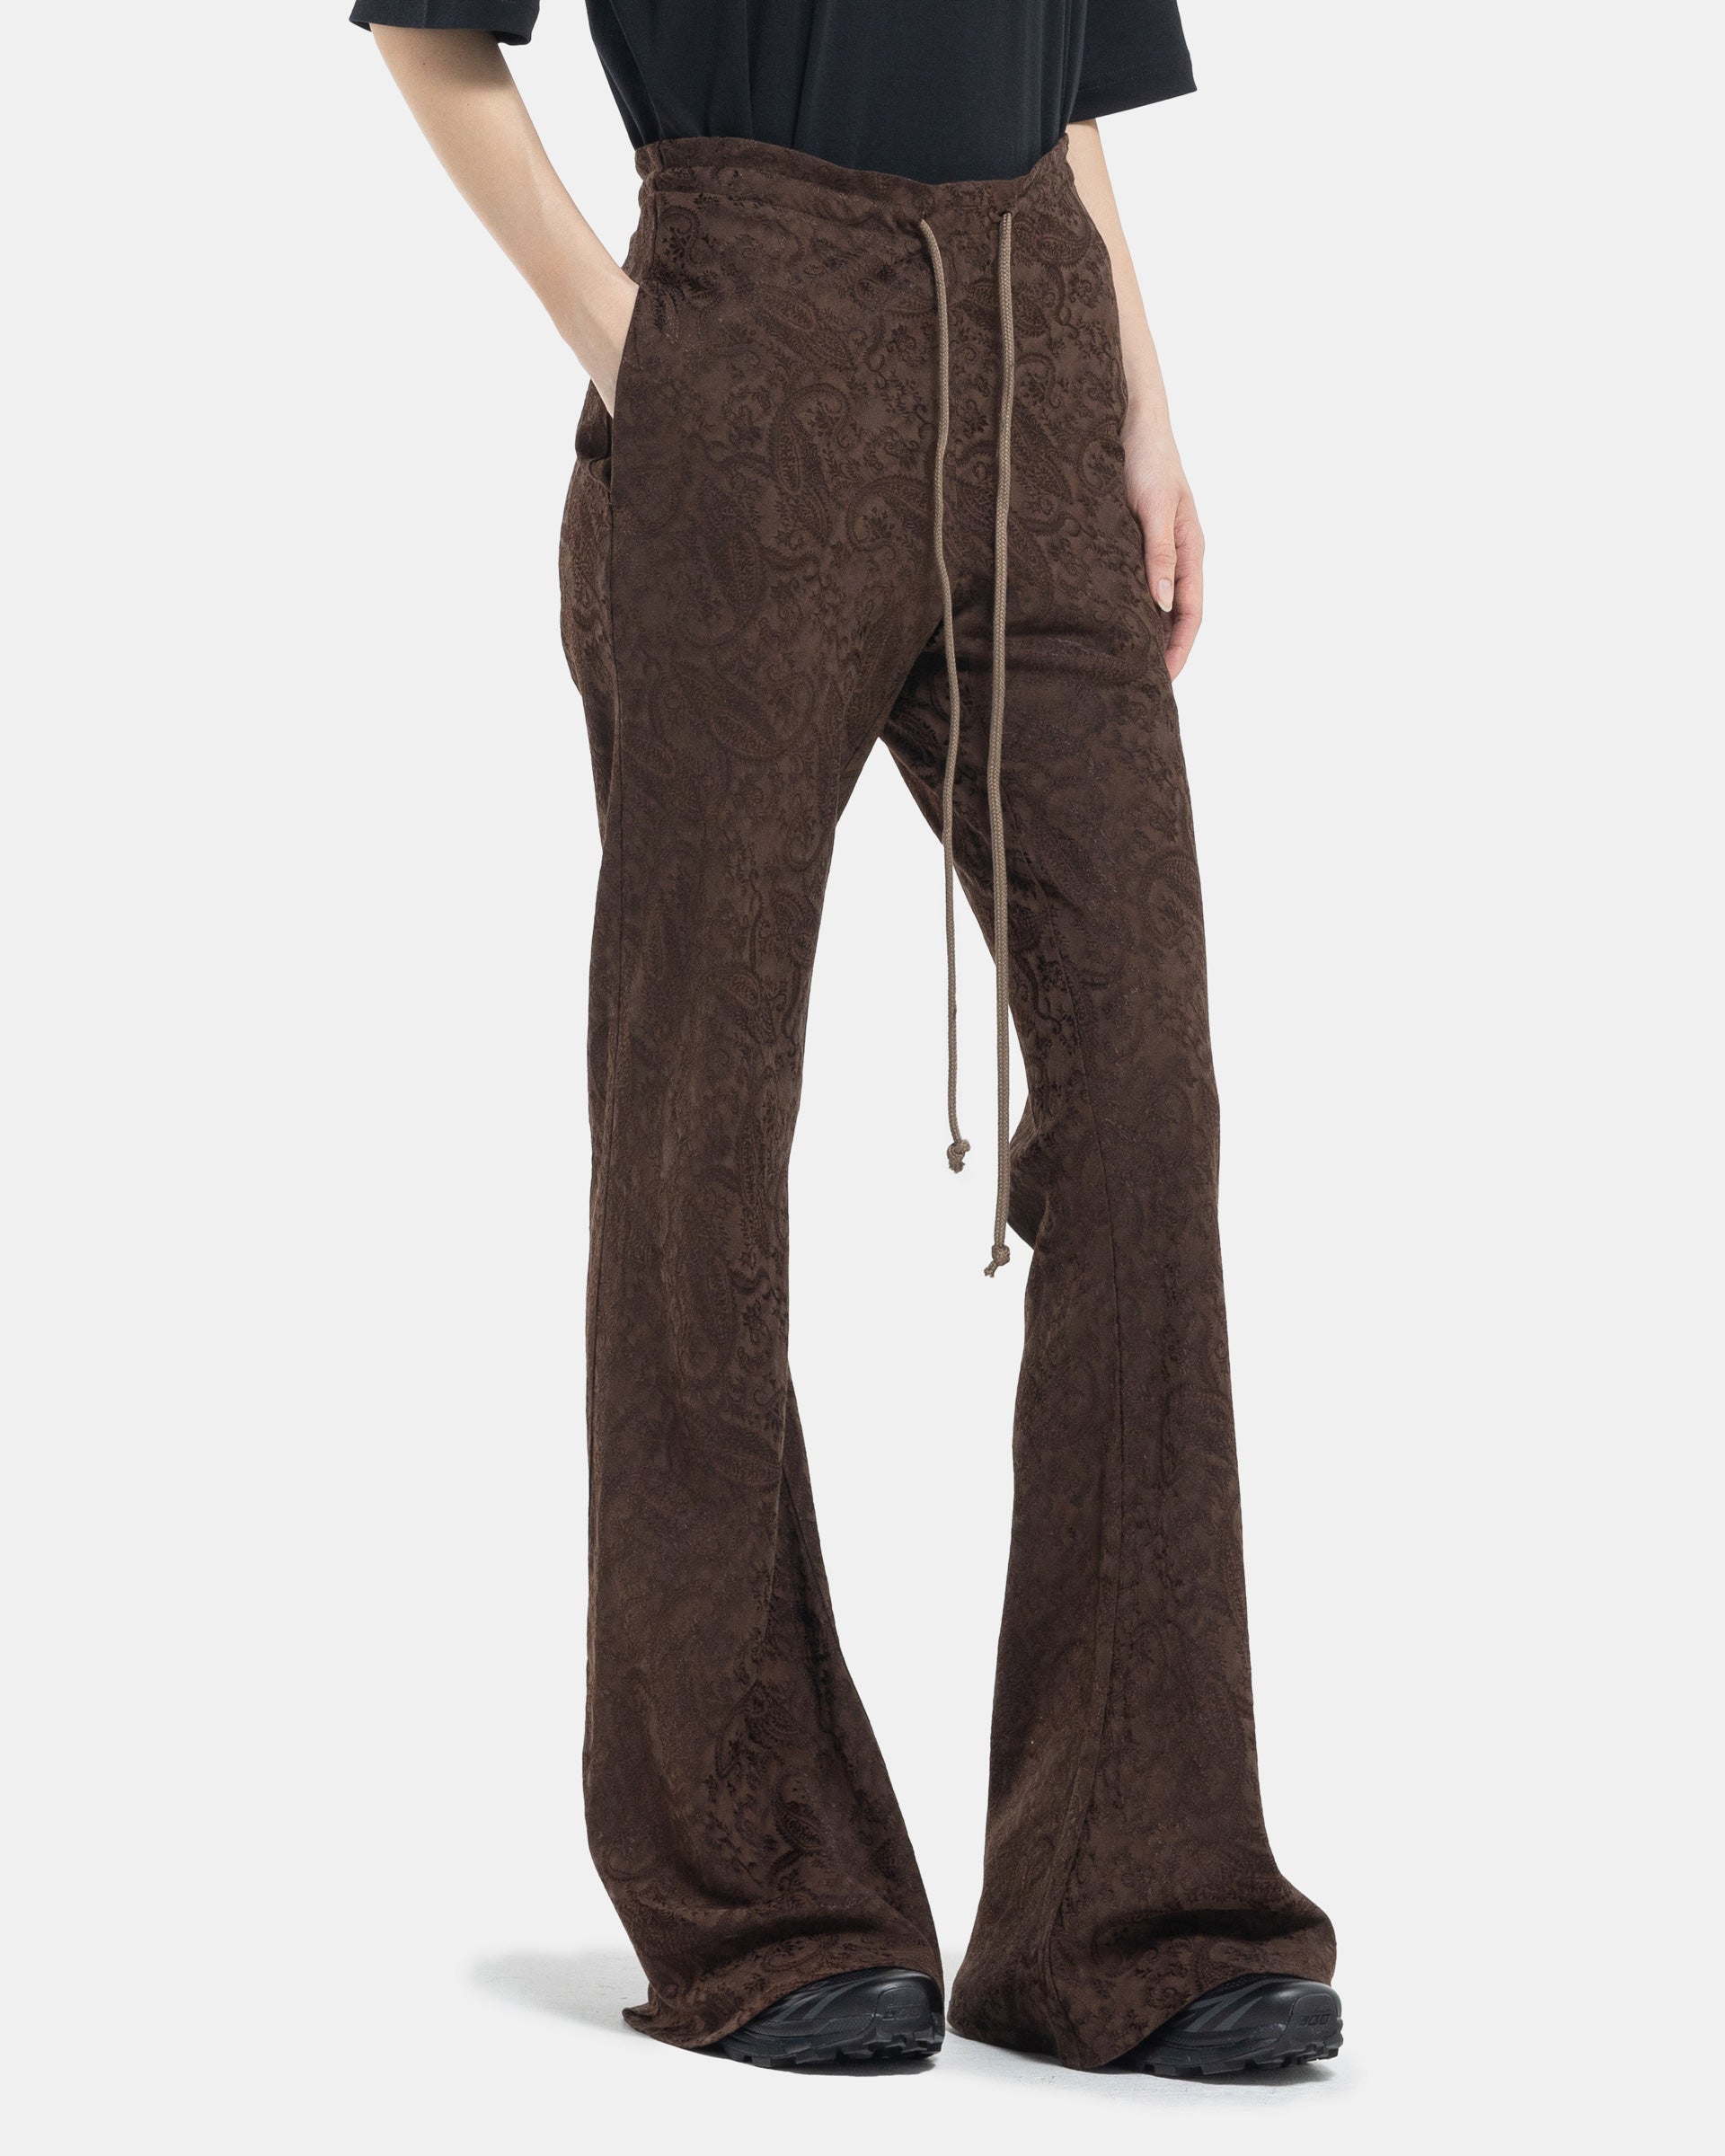 Brown Bias Flared Pant Front Angle with hand in pocket